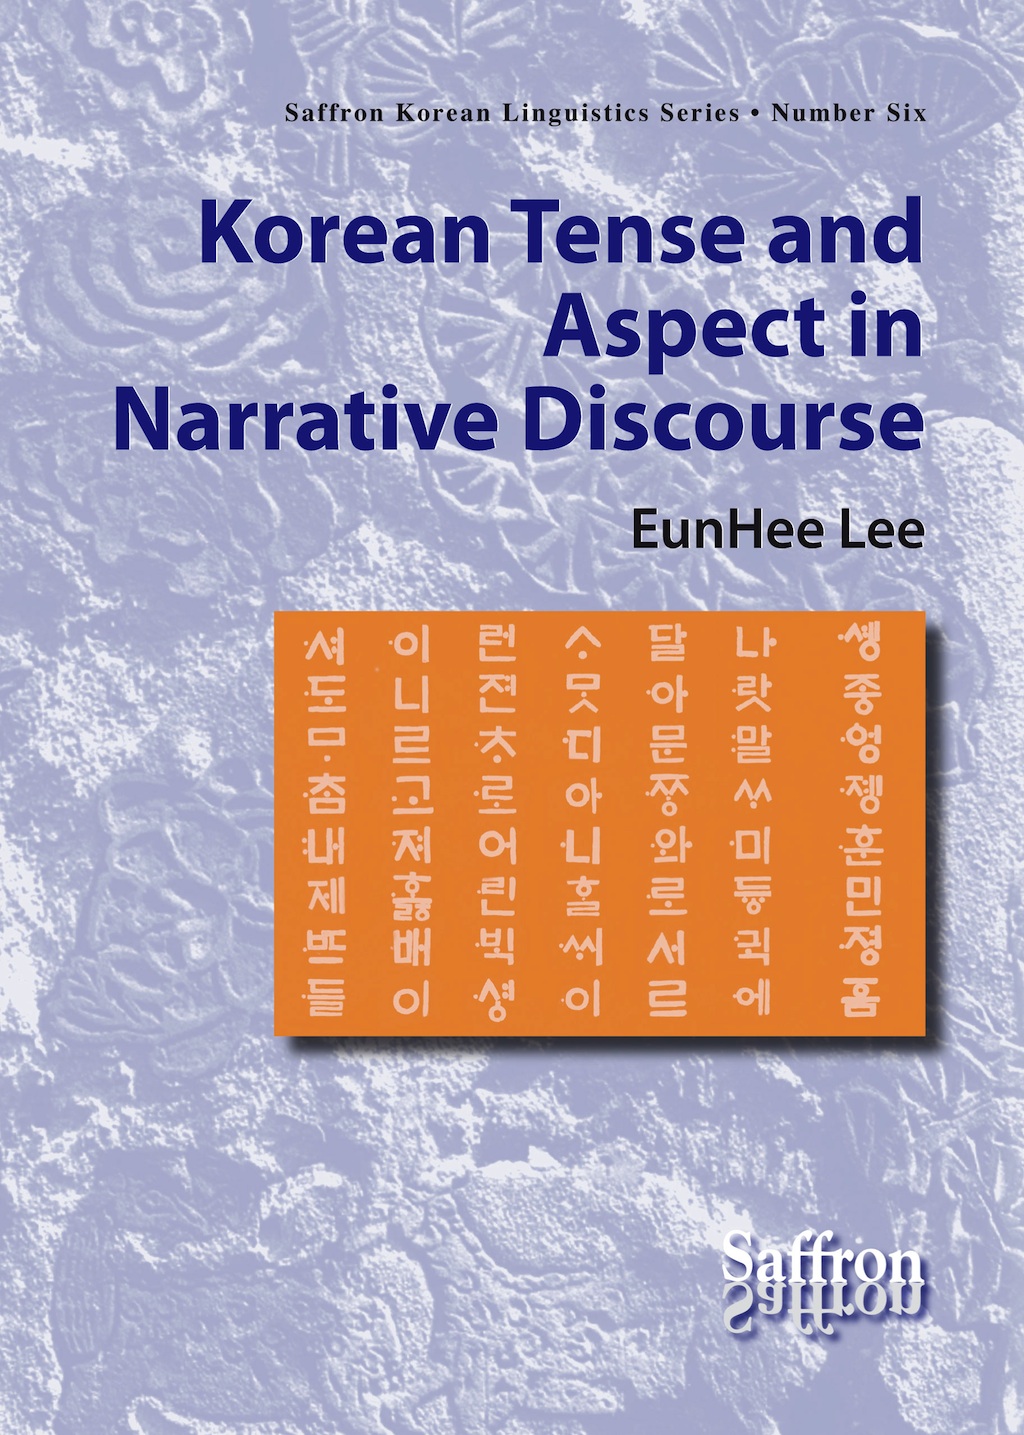 Korean Tense and Aspect in Narrative Discourse, by EunHee Lee